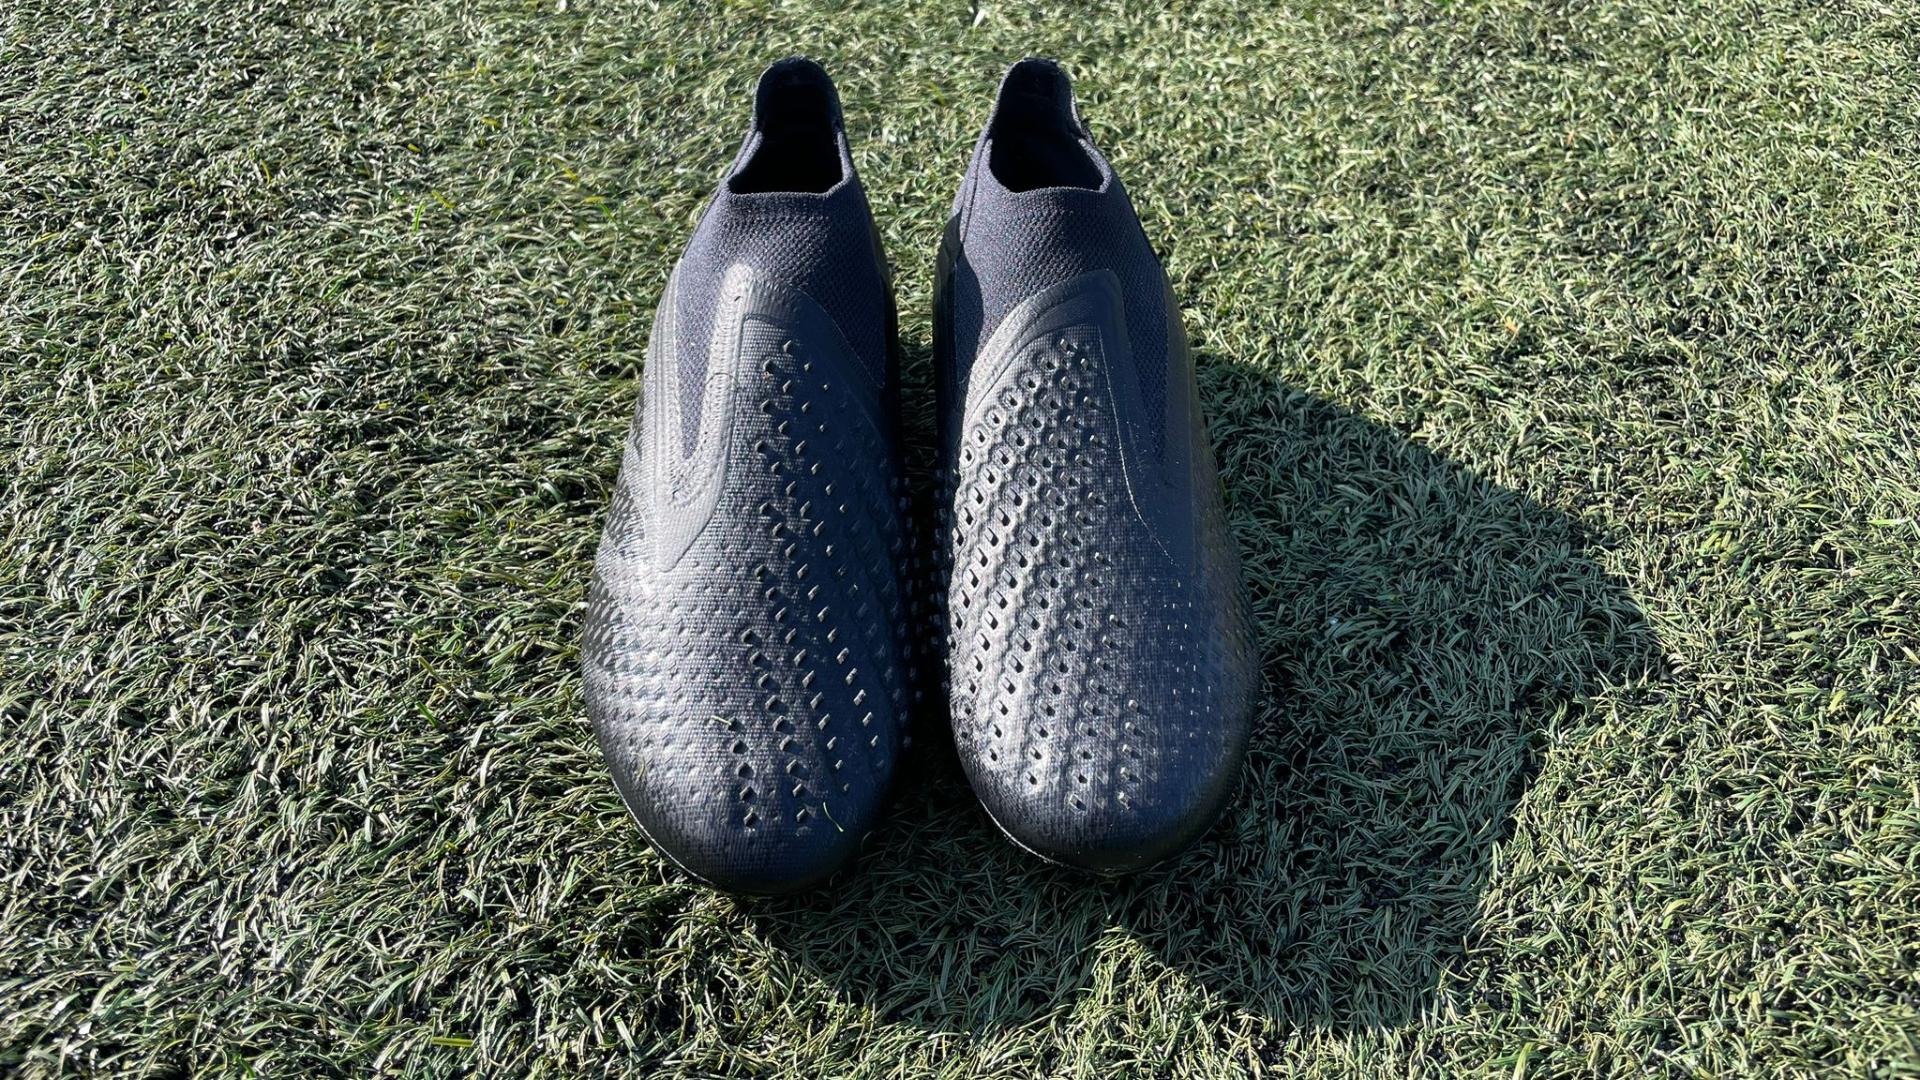 Adidas Predator Accuracy+ FG Cleats: The Perfect Choice for Football Enthusiasts